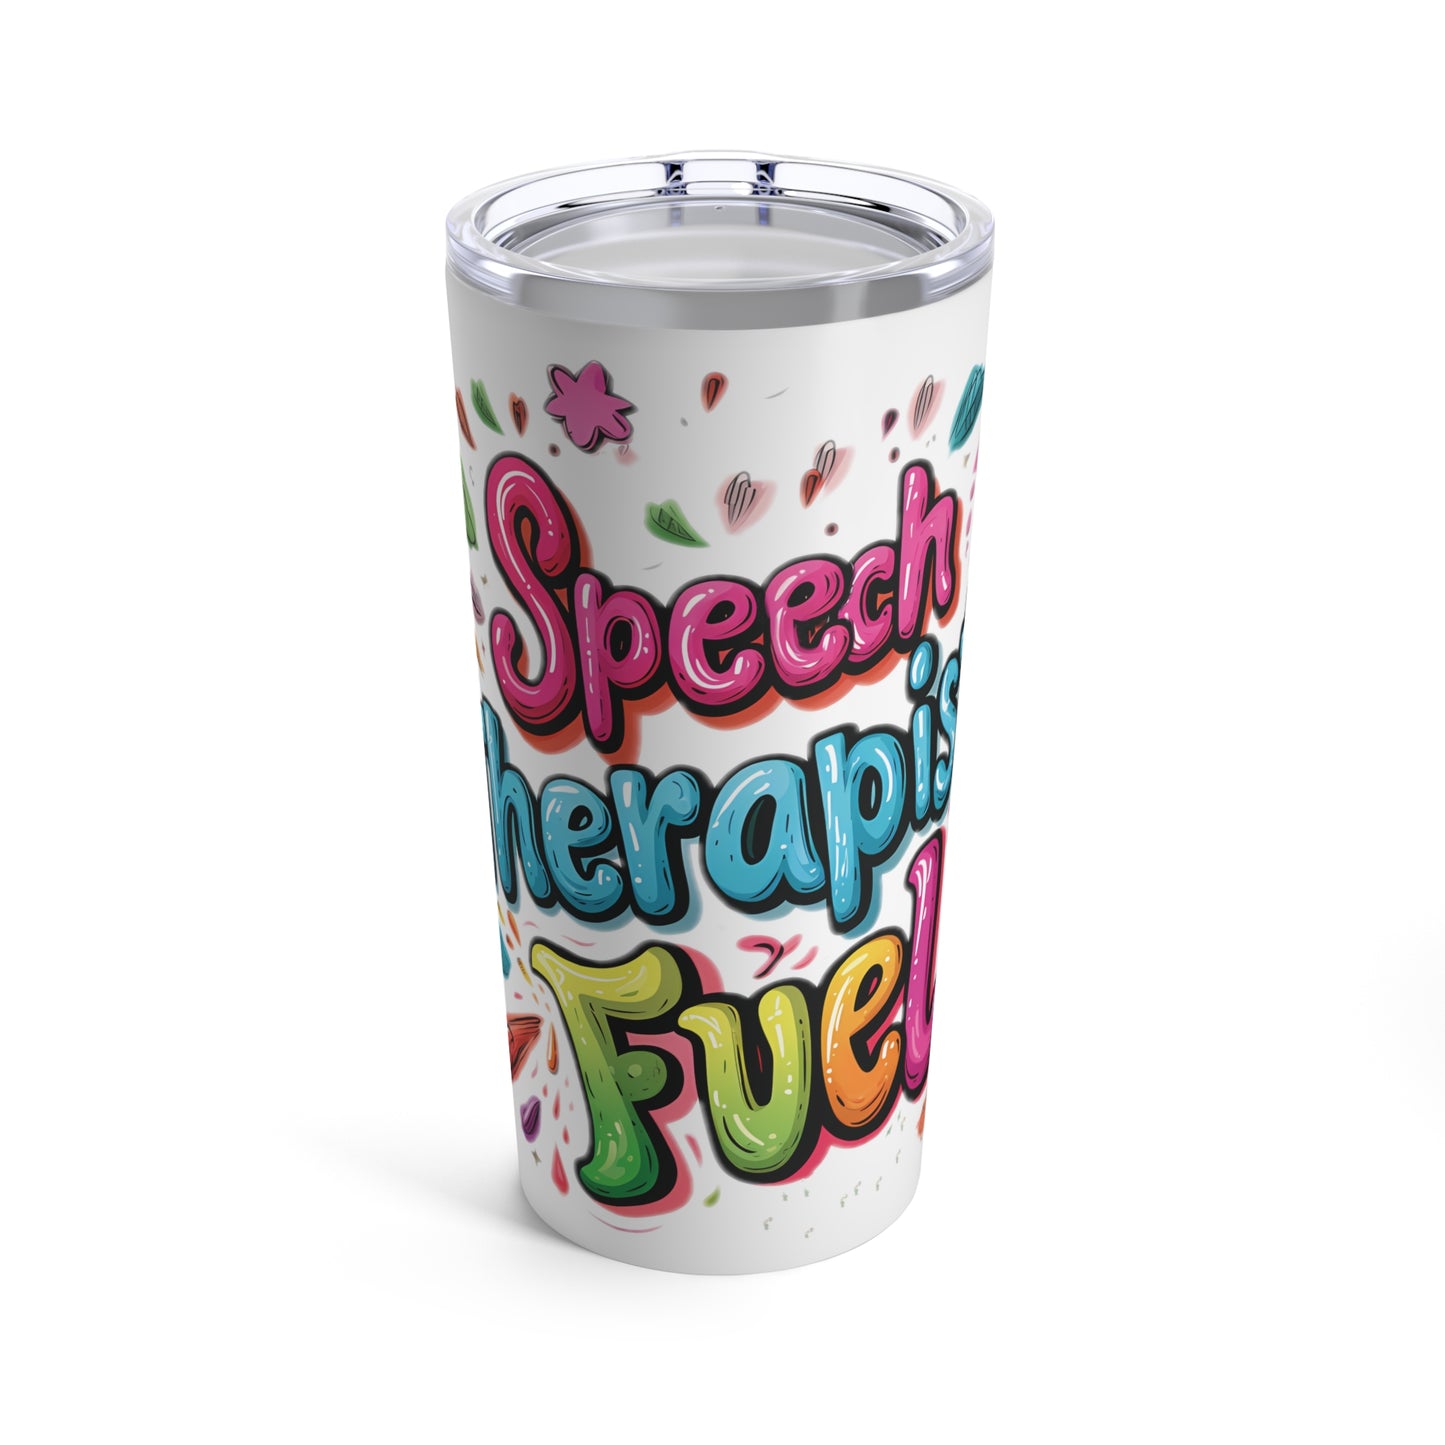 "Speech Therapist Fuel" 20oz Stainless Steel Tumbler - Vacuum-Insulated with Clear Lid